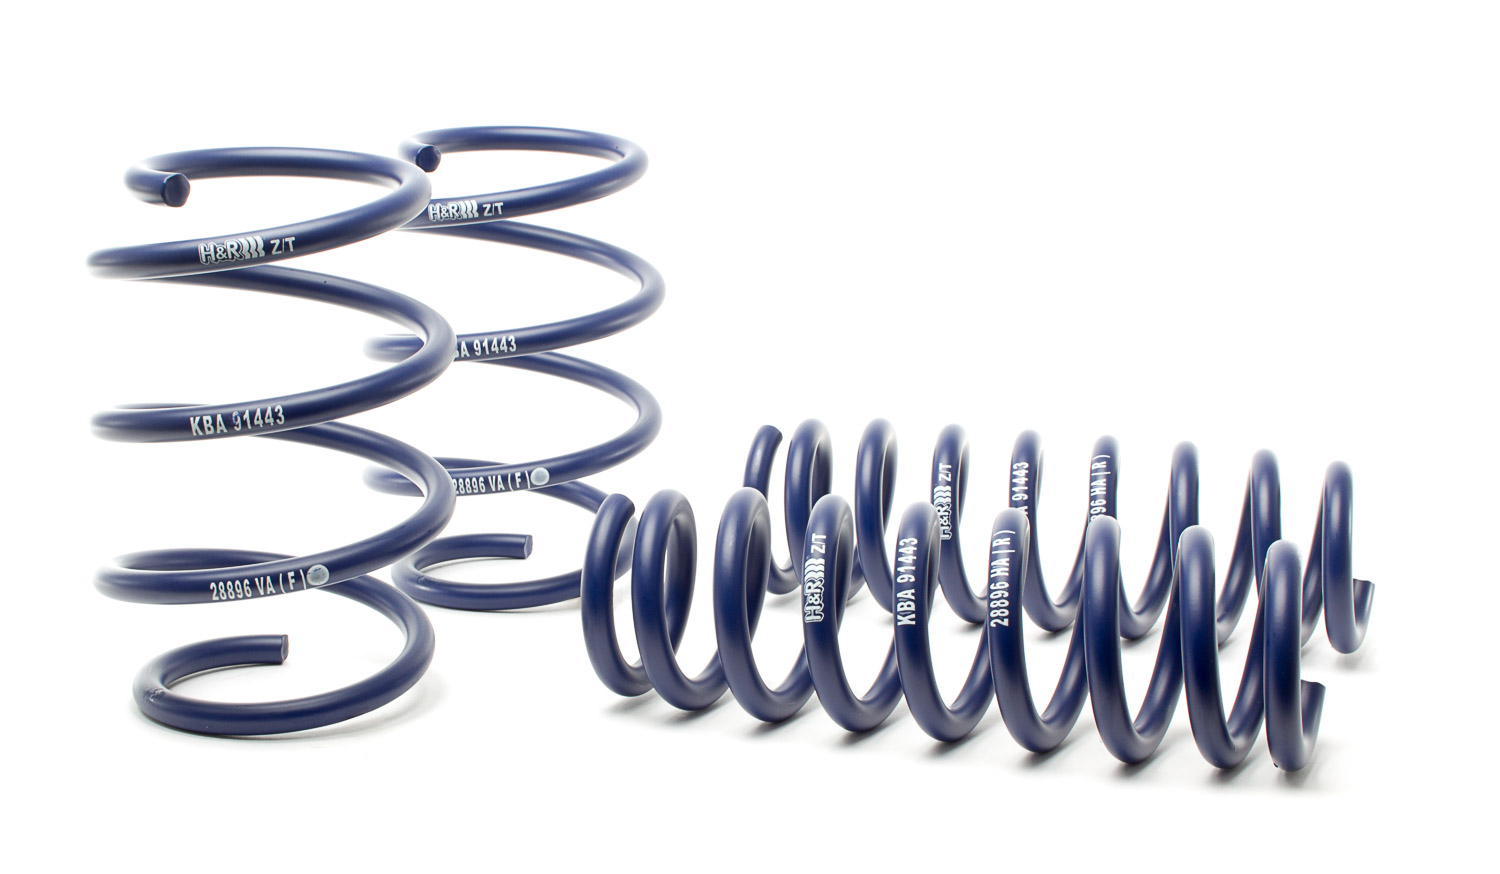 H&R LOWERING SPRINGS FOR THE BMW X1 (TYPE U1X) - H & R